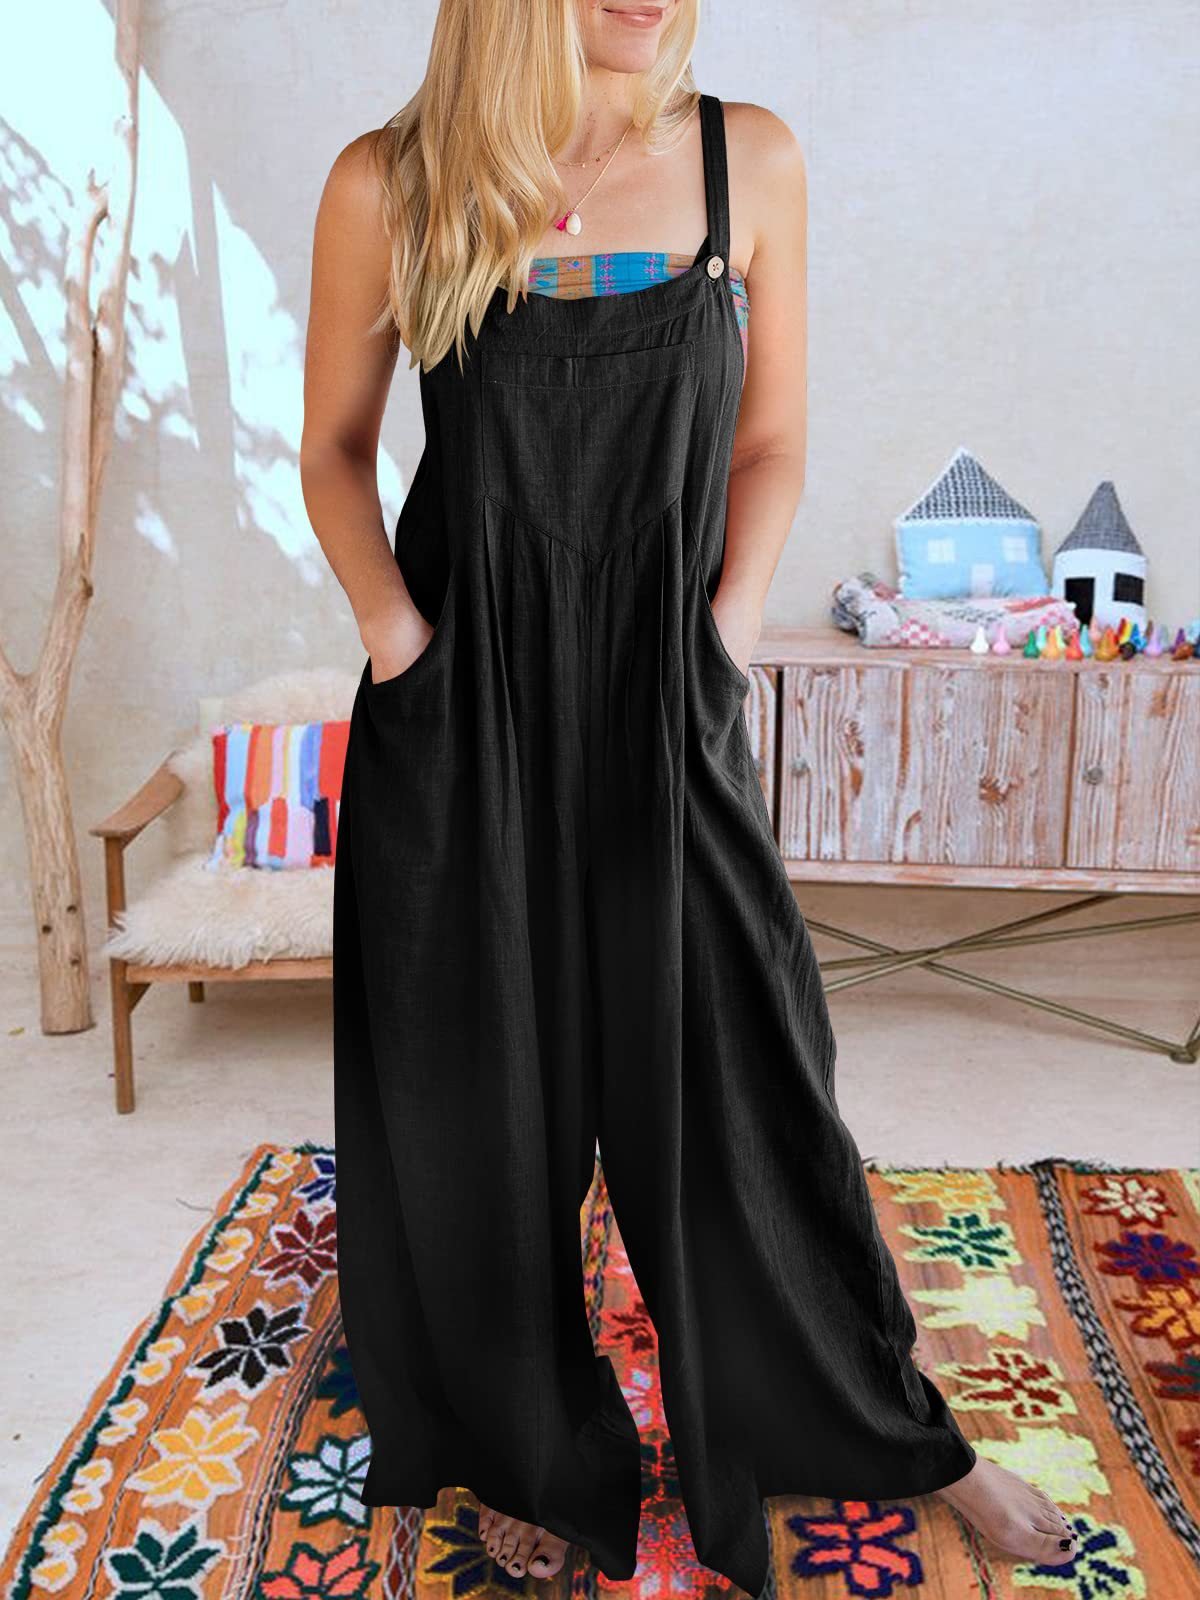 LAST DAY 50% OFF🔥-Plus Size Wide Leg Overalls Jumpsuit (Buy 2 Free Shipping)